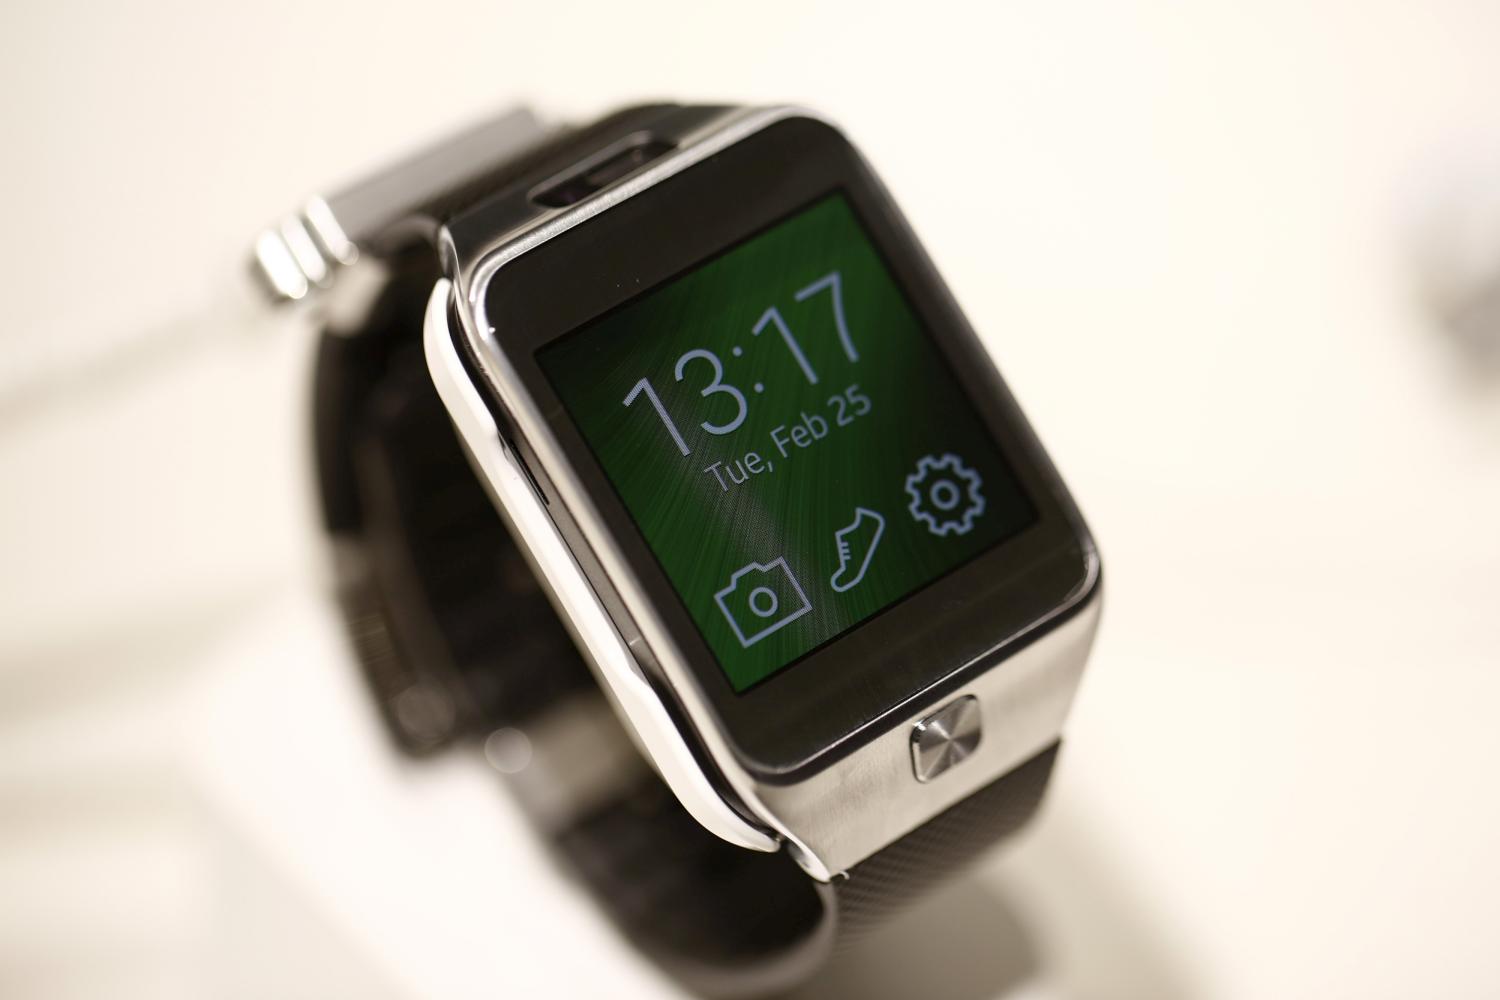 A Galaxy Gear 2 smartwatch sits on display at the Samsung Electronics Co. pavilion on day two of the Mobile World Congress in Barcelona, Spain, on Tuesday, Feb. 25, 2014. (Simon Dawson--Bloomberg / Getty Images)